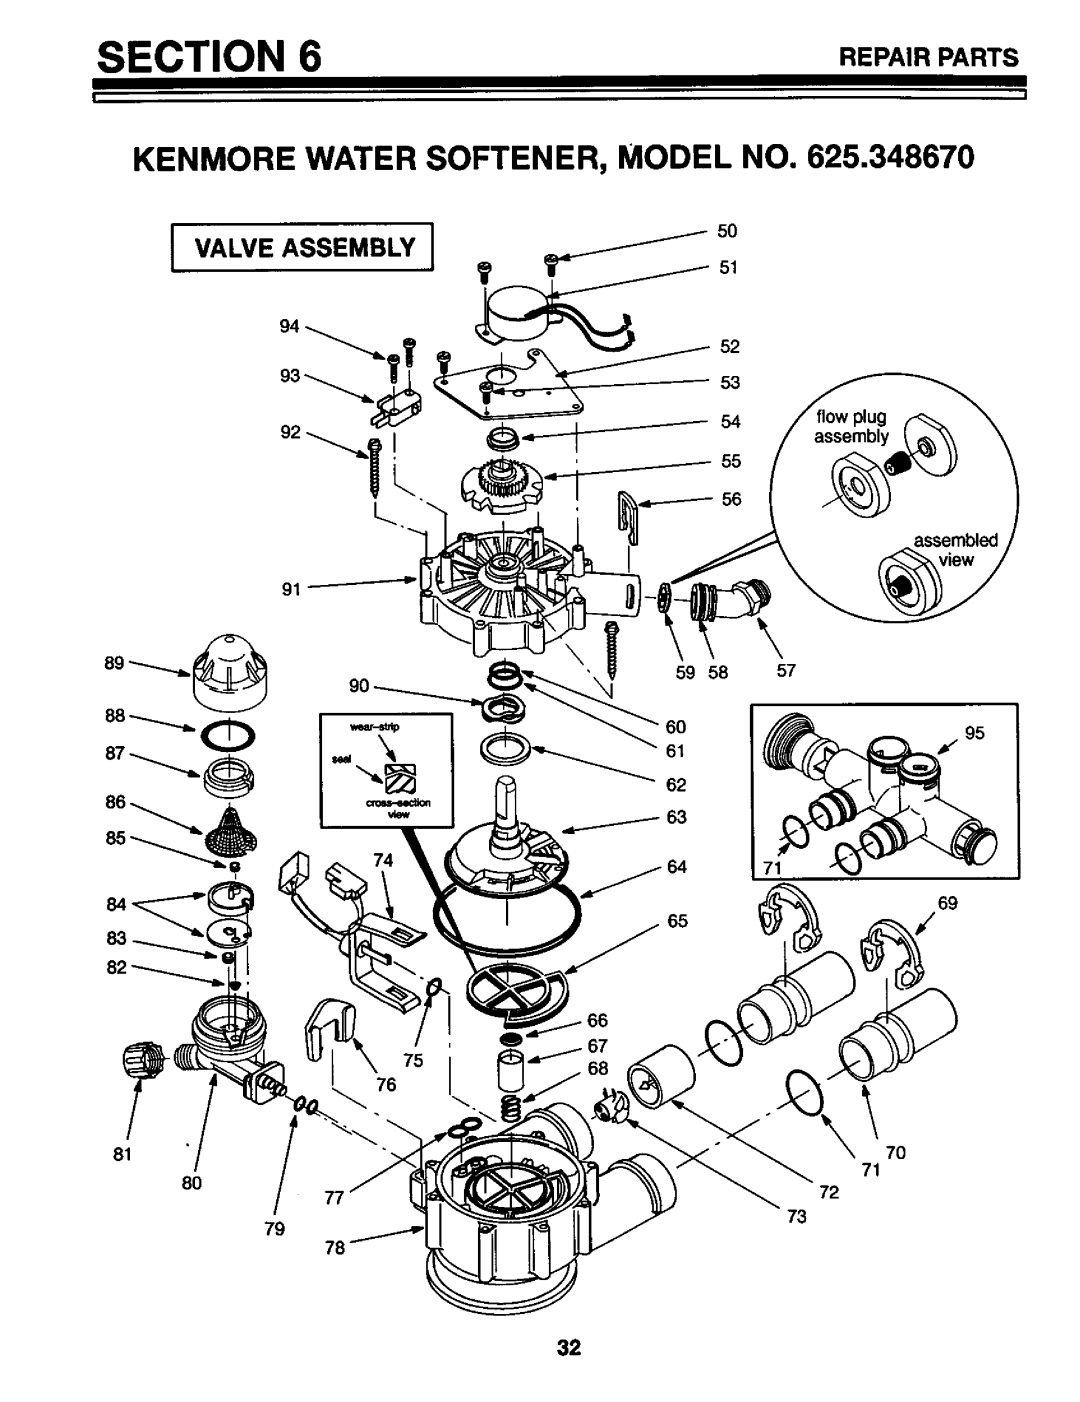 Kenmore 625.34867 owner manual Section, R,=P,,,Irparts, Kenmore Water Softener, Model No 